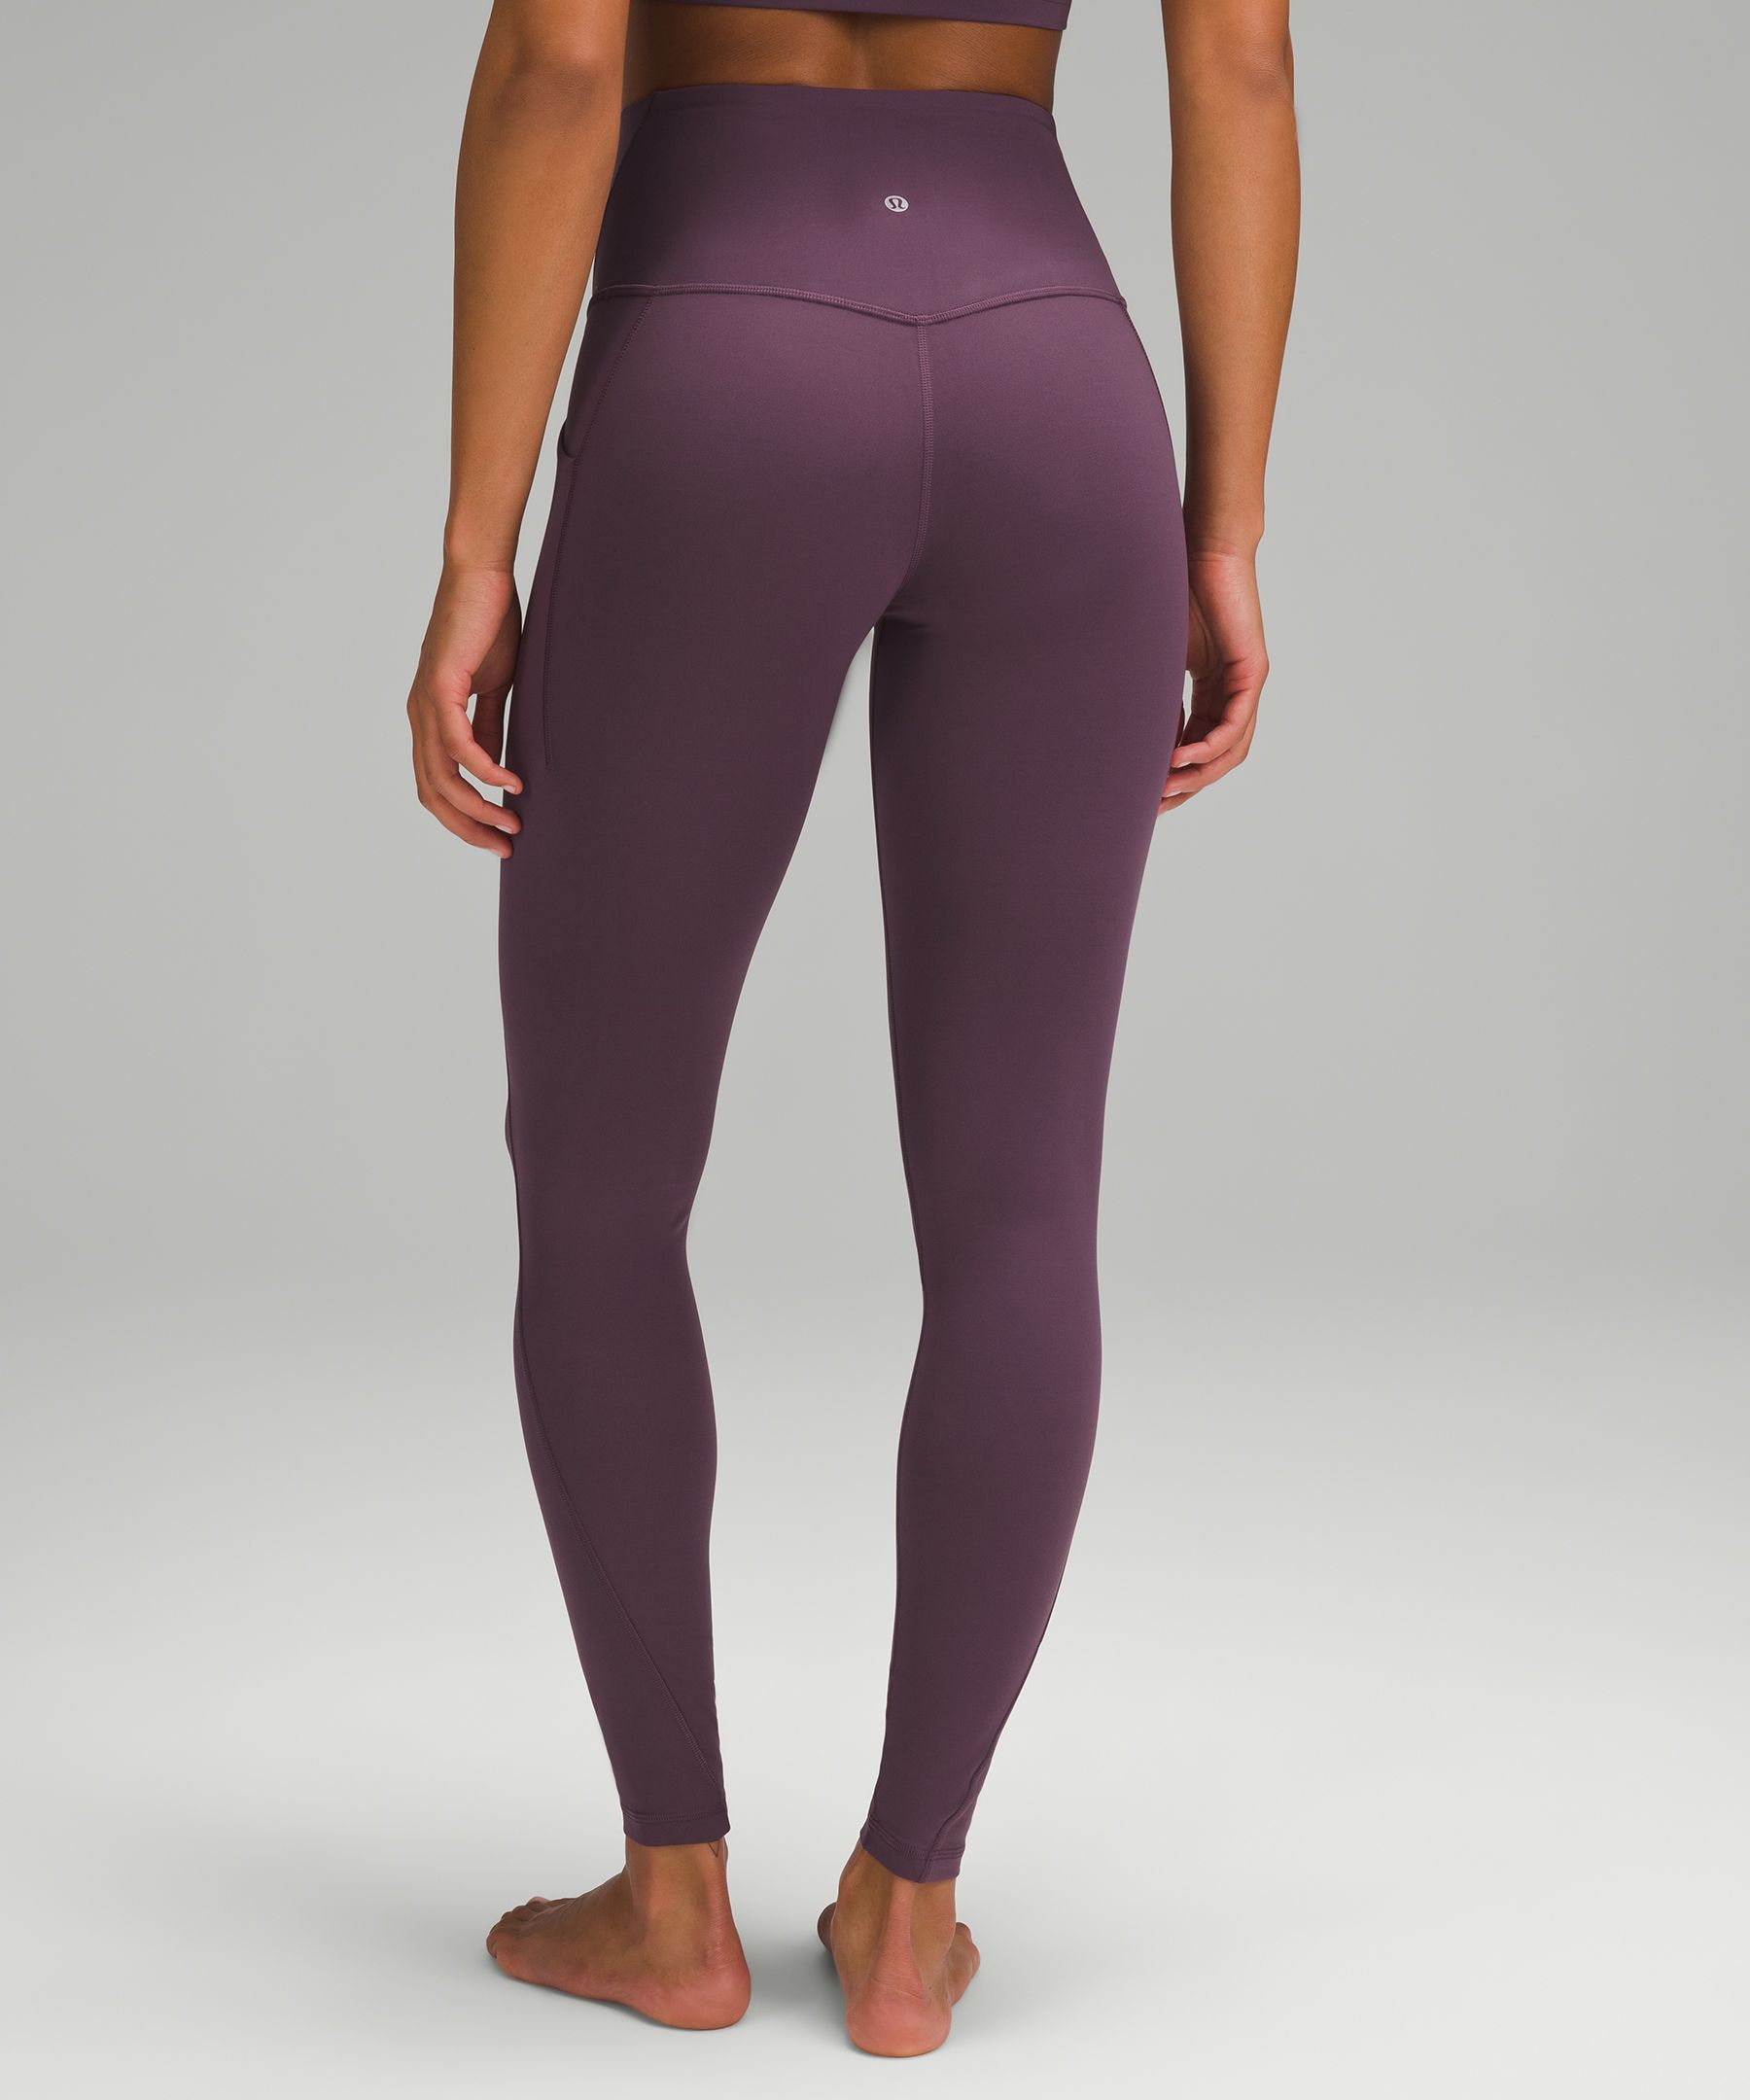 lululemon Align™ High-Rise Pant with Pockets 28, Women's Leggings/Tights